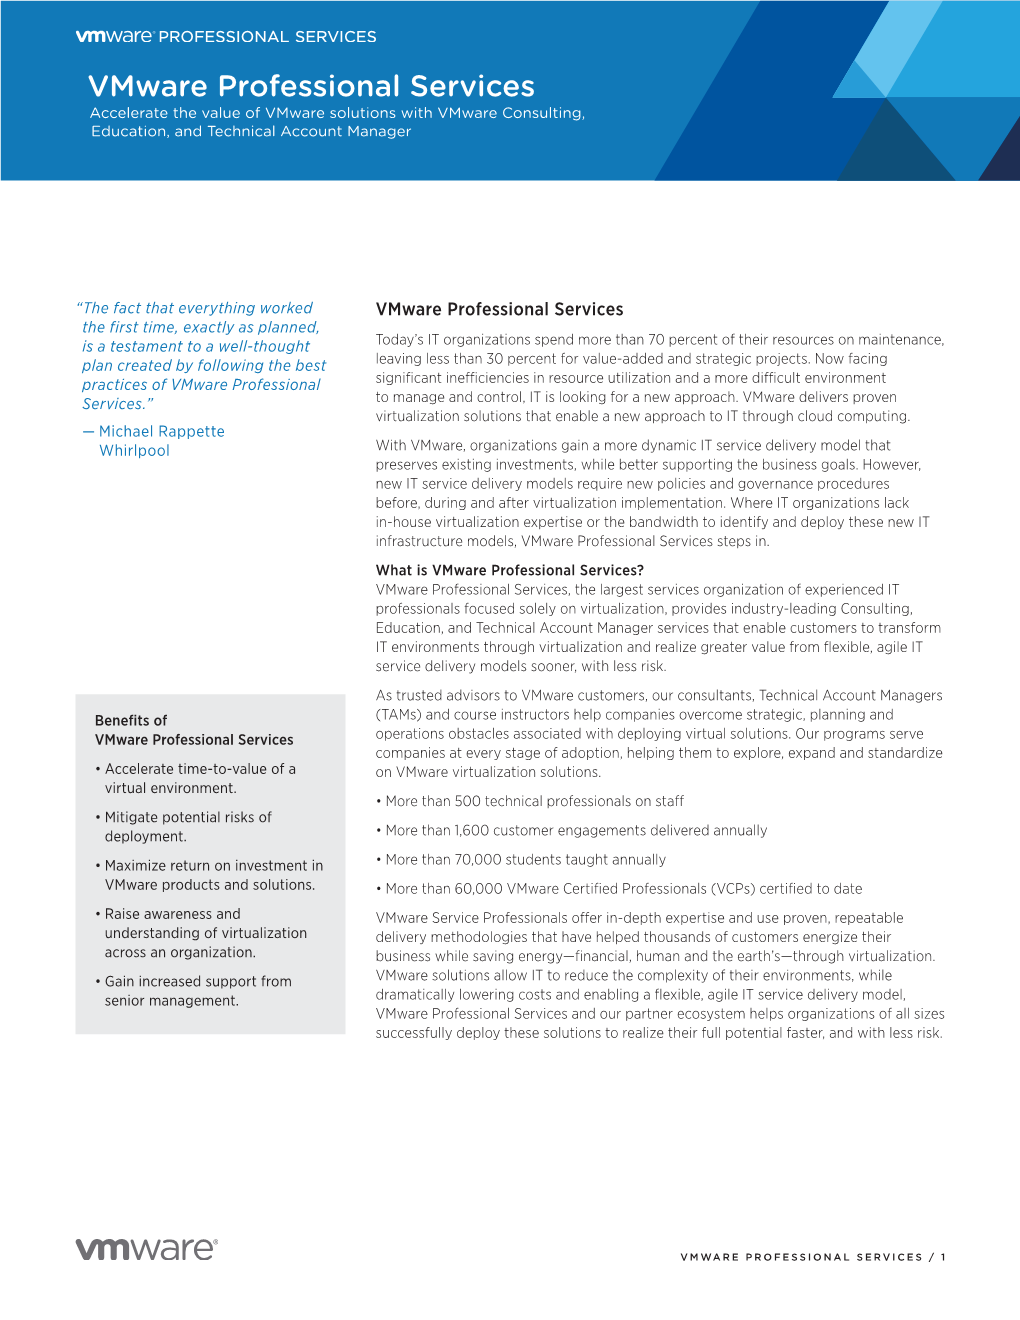 Vmware Professional Services Accelerate the Value of Vmware Solutions with Vmware Consulting, Education, and Technical Account Manager